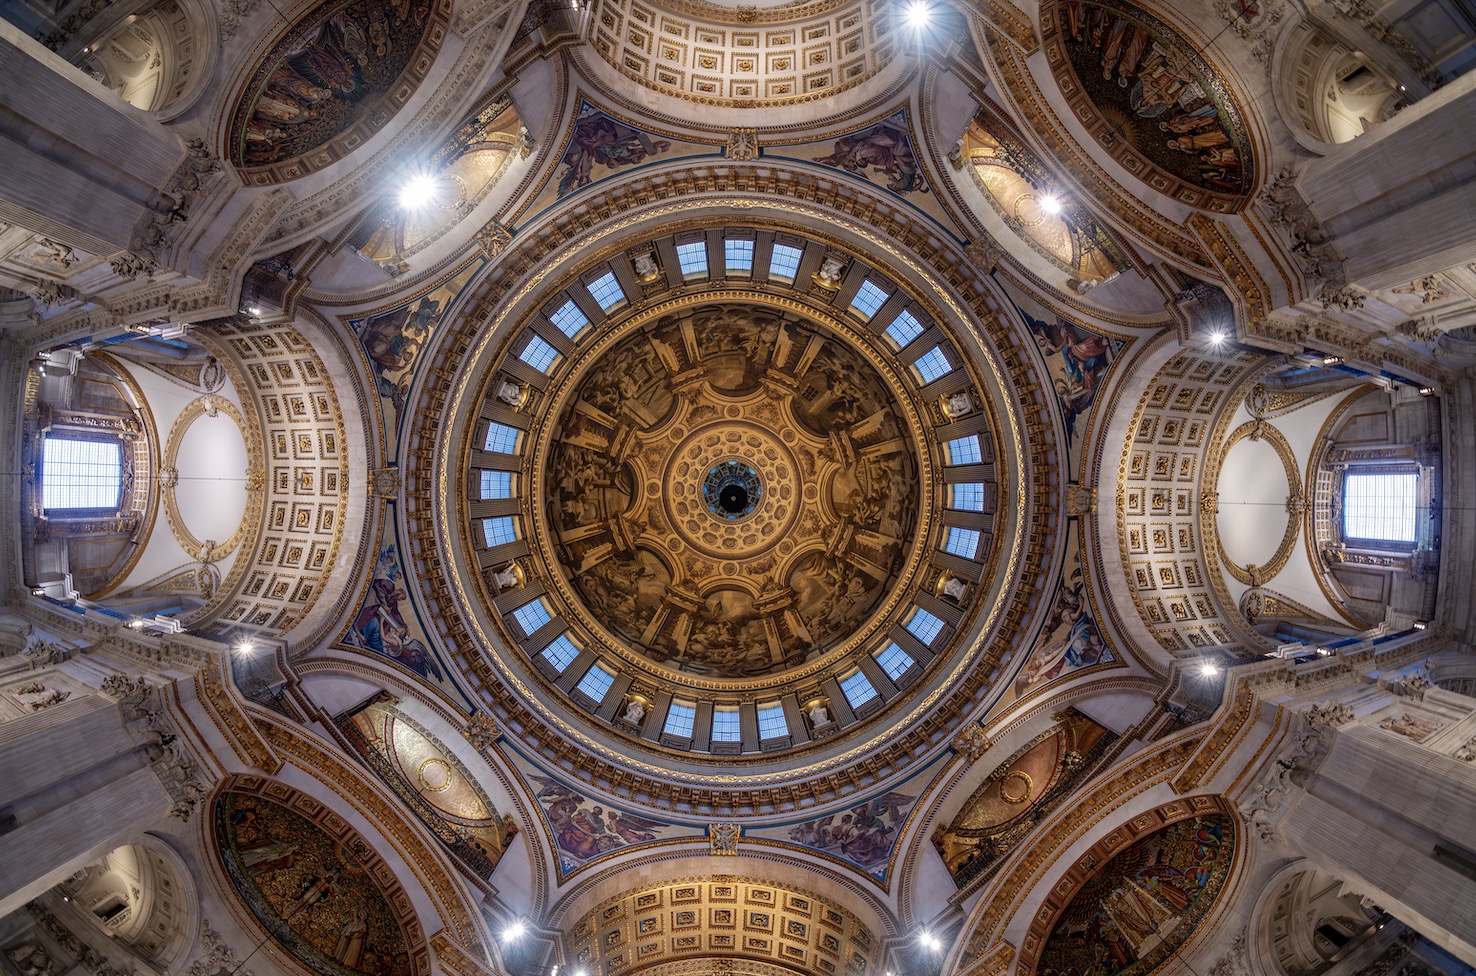 St Paul's Cathedral Ceiling - Always Look Up